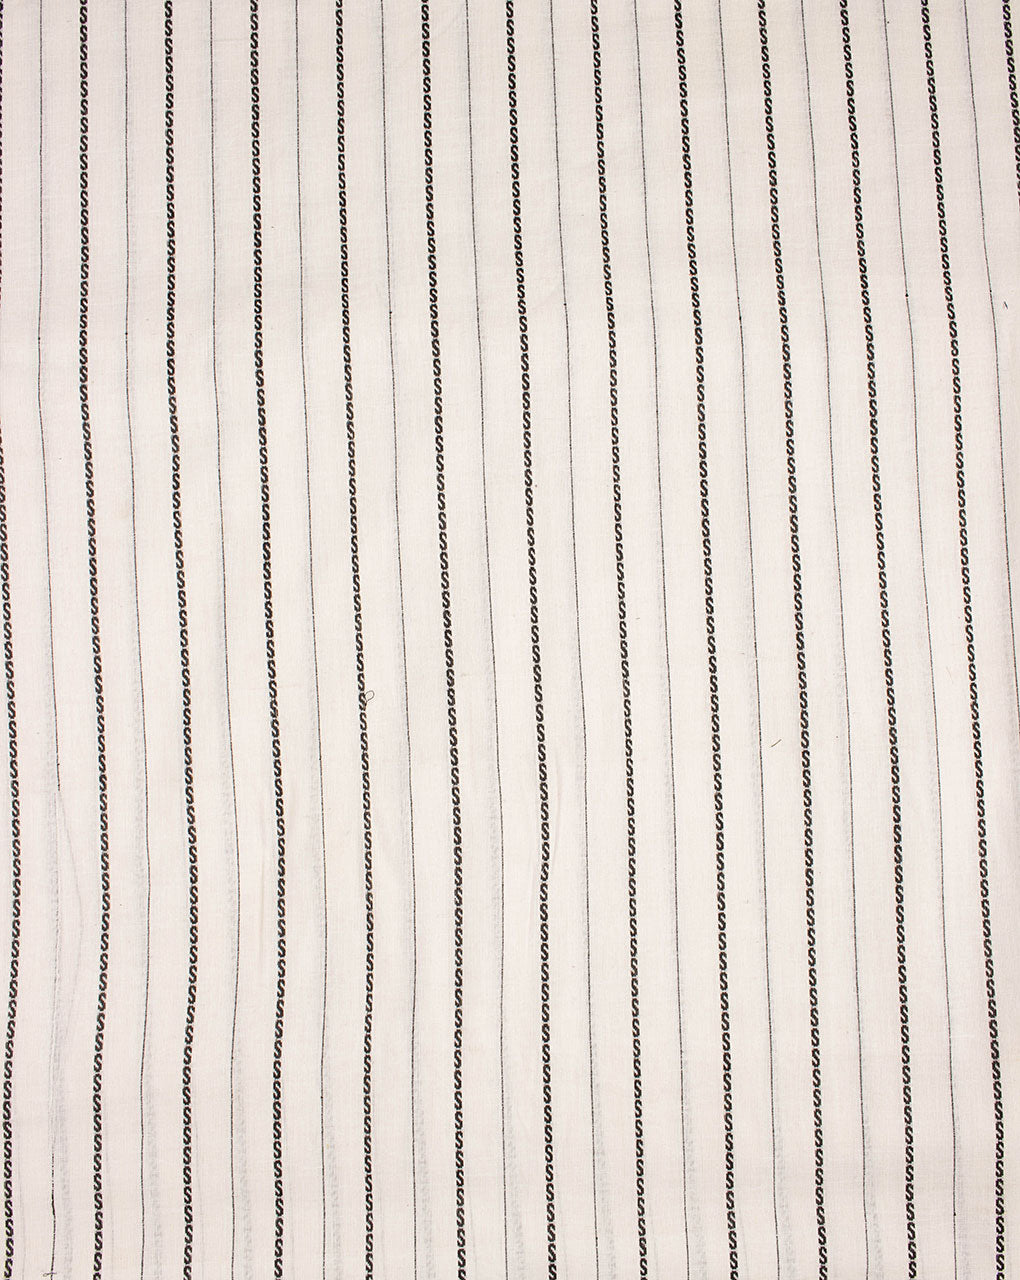 Stripes Woven Loom Textured Dobby Cotton Fabric - Fabriclore.com